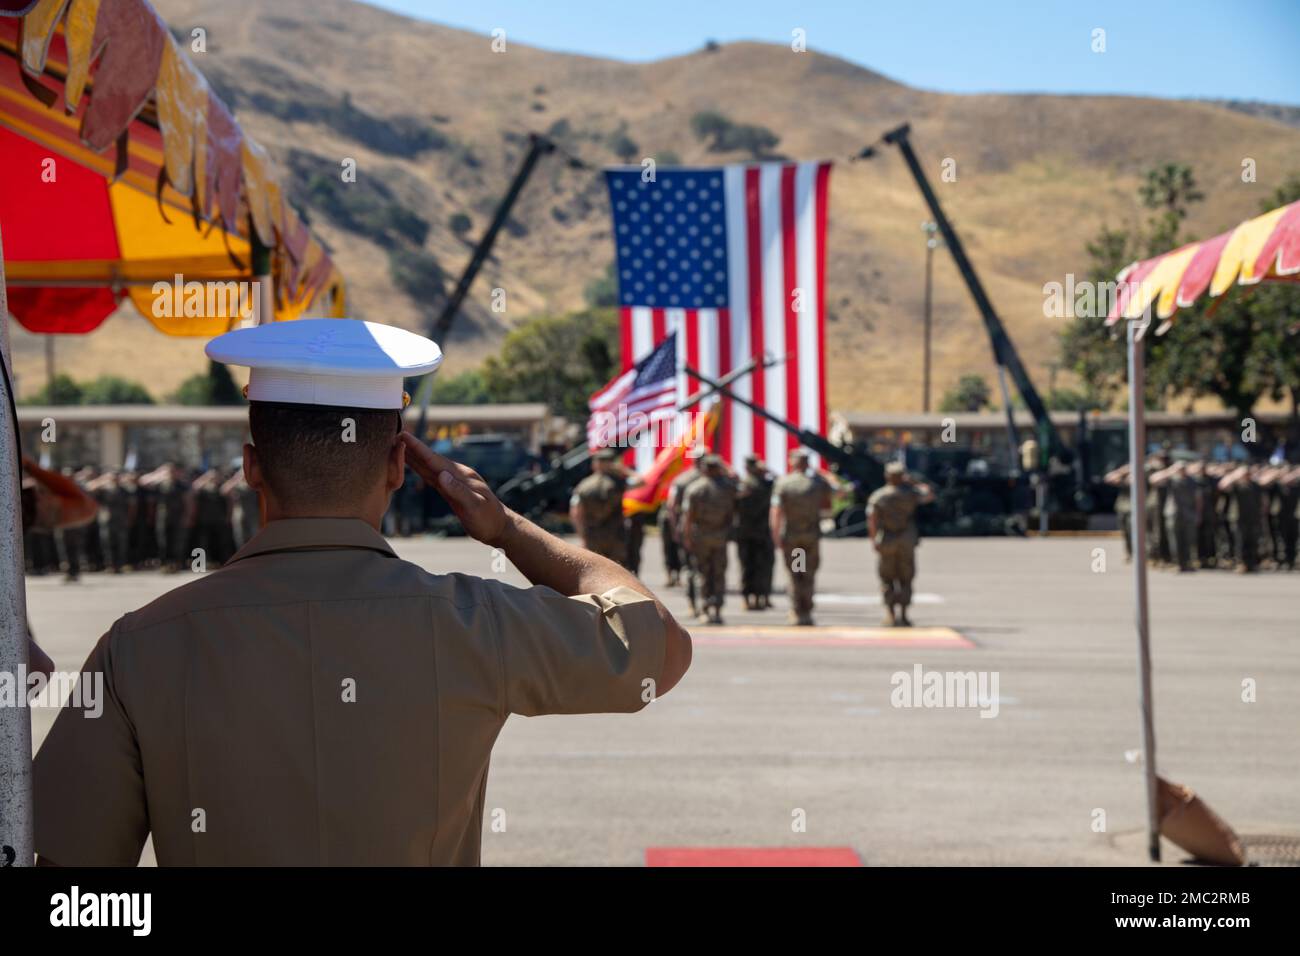 U.S. Marines with 1st Battalion, 11th Marine Regiment (1/11), 1st Marine Division, salute the flag for the national anthem during a change of command ceremony at Marine Corps Base Camp Pendleton, California, June 24, 2022. During the ceremony, Lt. Col. Matthew T. Ritchie relinquished command of 1/11 to Lt. Col. David J. Palka. Stock Photo